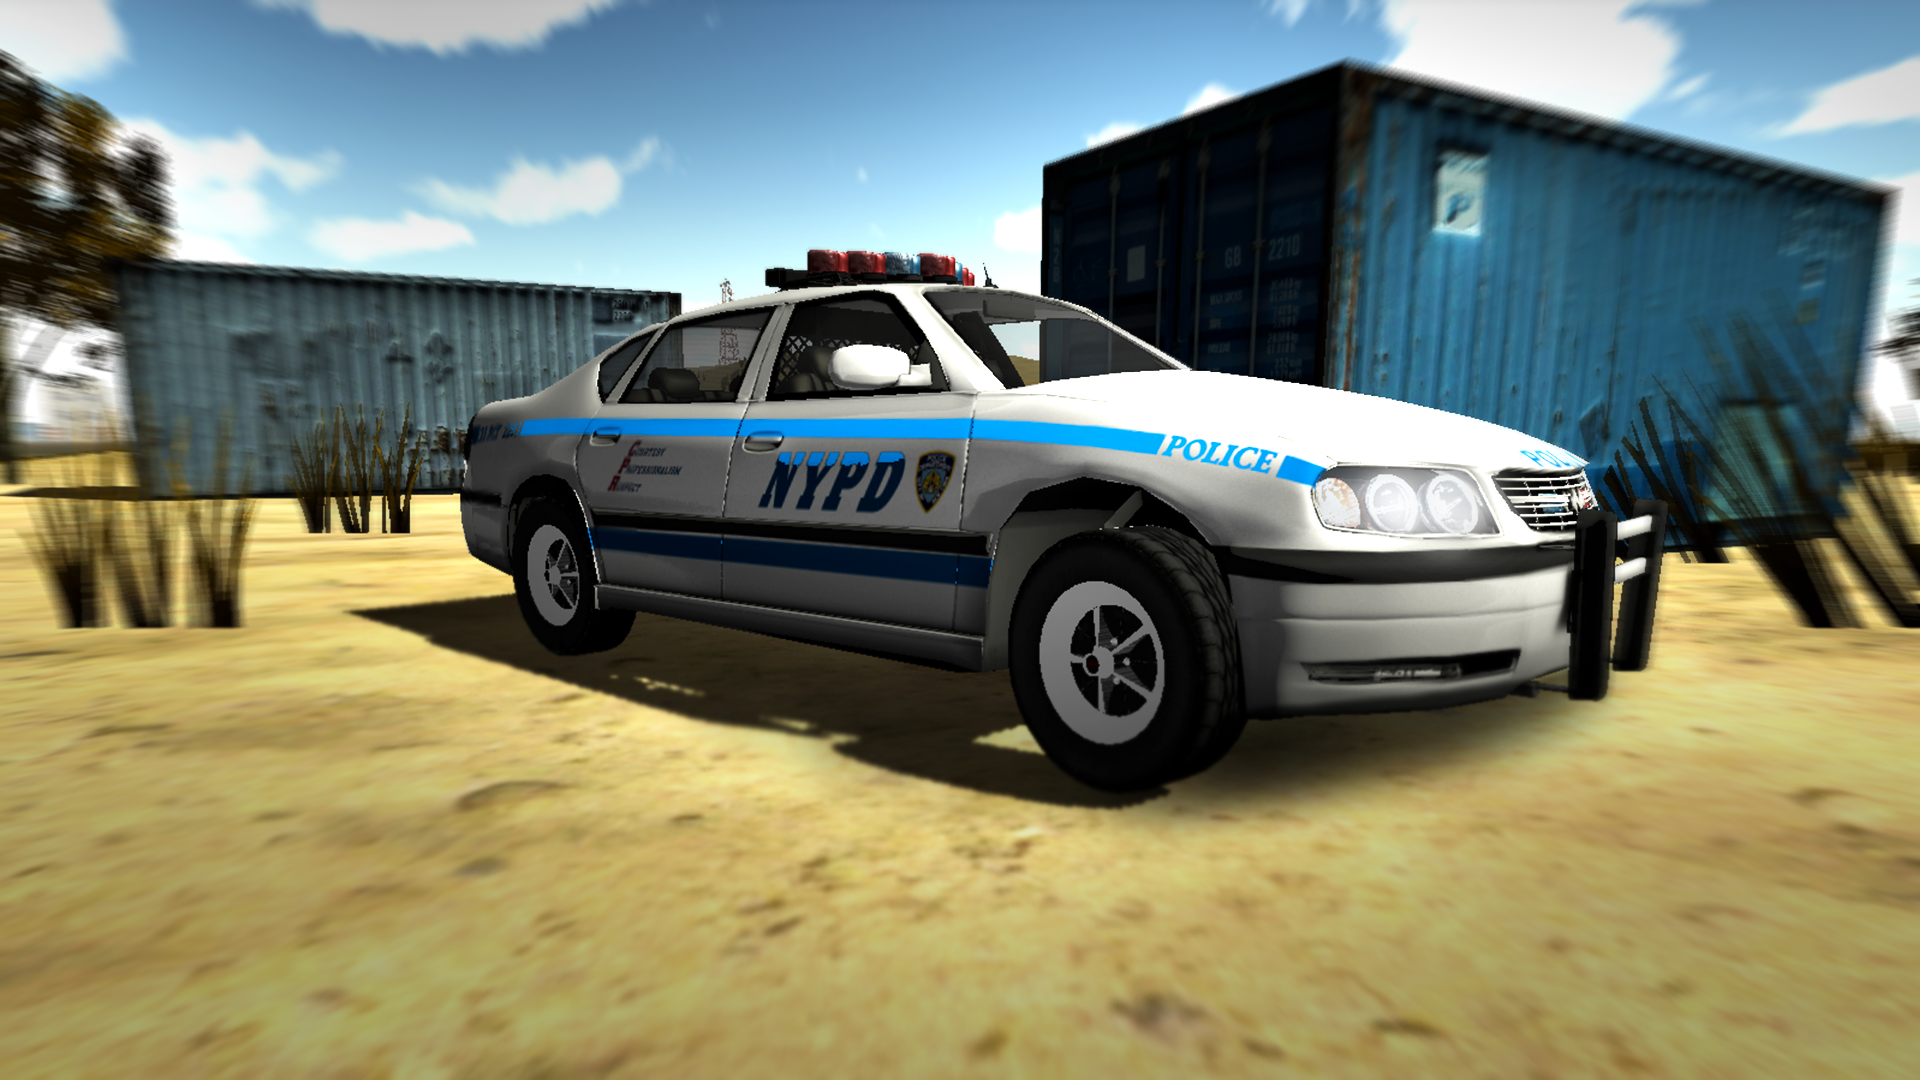 New York Police Simulator APK 1.0 for Android – Download New York Police  Simulator XAPK (APK + OBB Data) Latest Version from APKFab.com